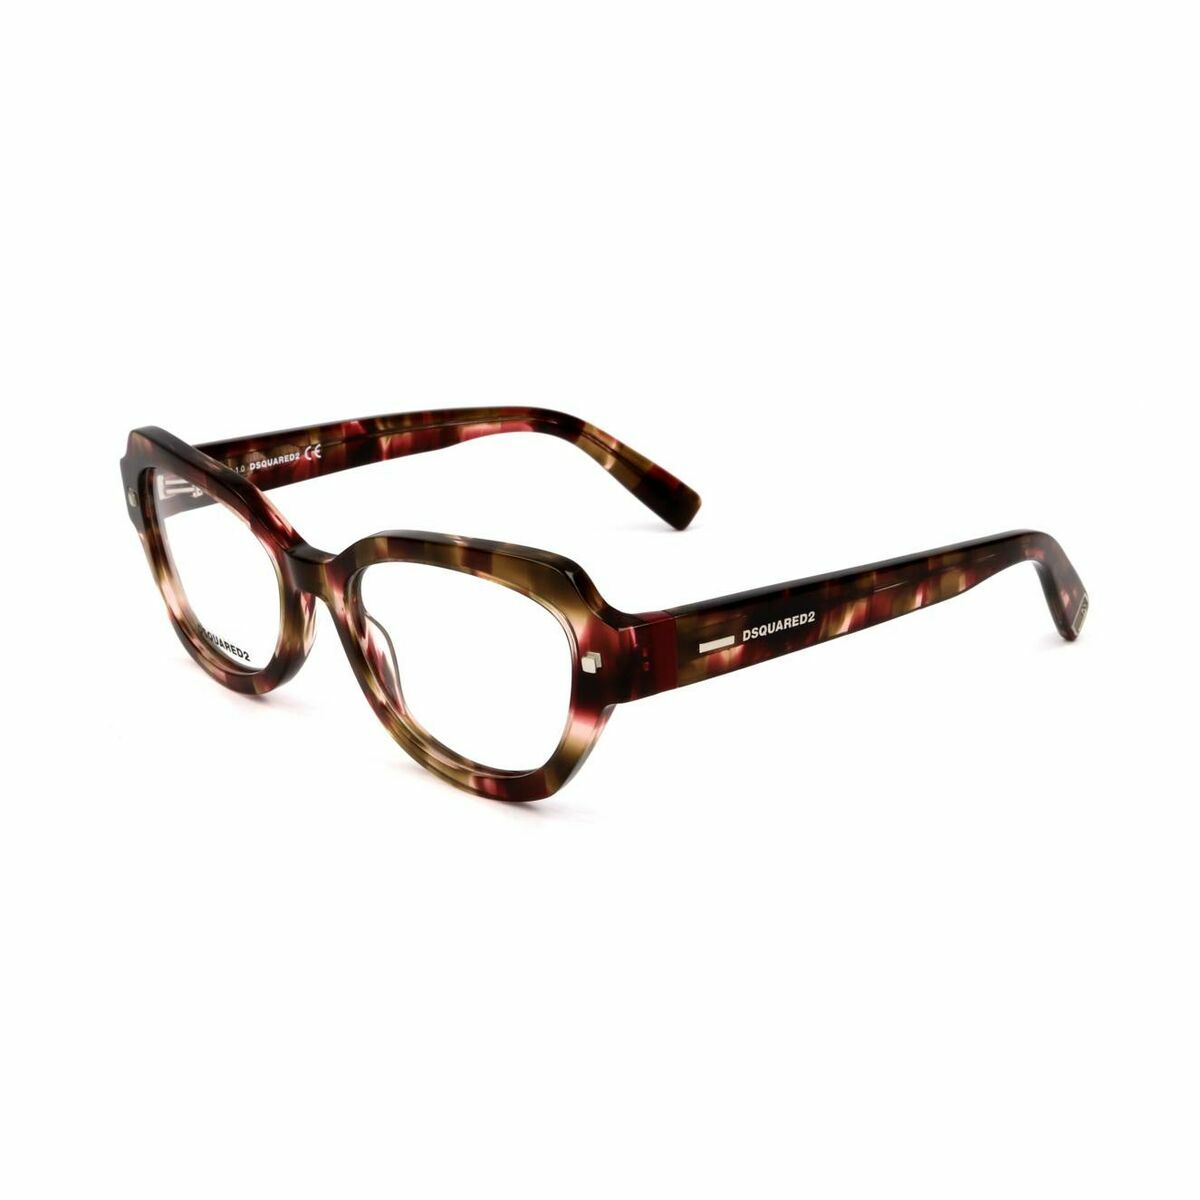 Ladies' Spectacle frame Dsquared2 DQ5335-068-53 Brown